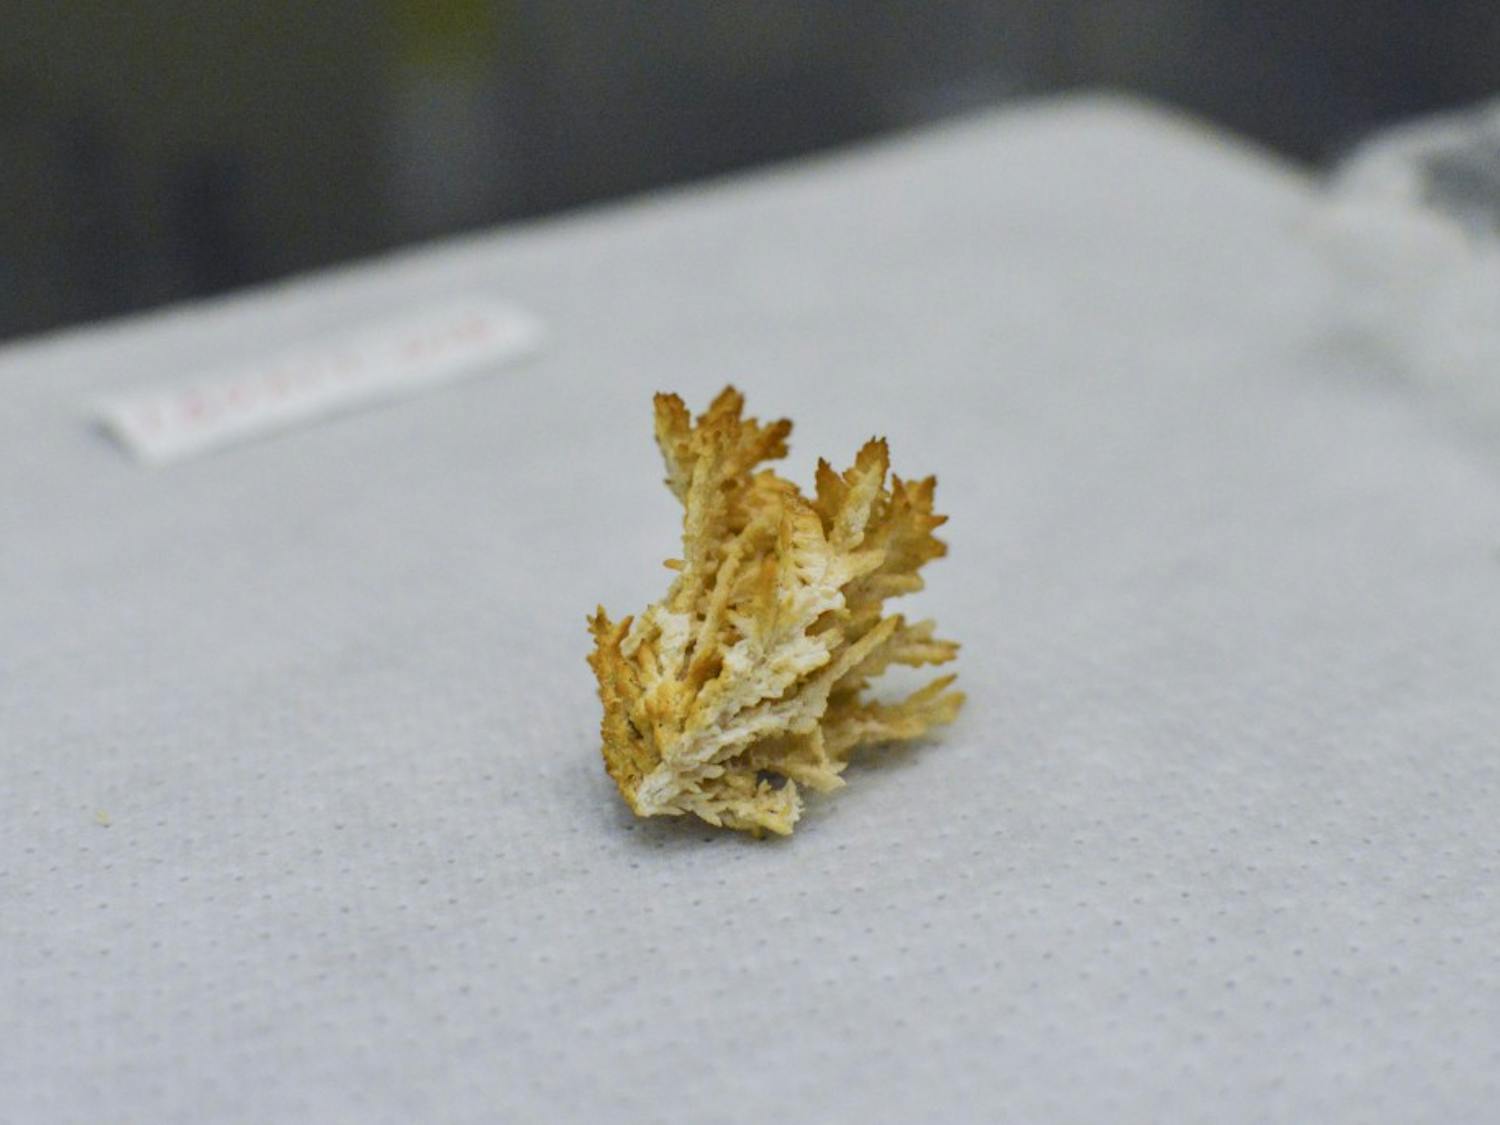 A type of crystal known as a floret lies in a clean room laboratory inside Northrop Hall on Monday morning. This was found on the 13,000-year-old remains of a female discovered in a collapsed chamber in the Hoyo Negro, part of the Sac Actun cave system, located within the Yucatan Peninsula of Mexico.